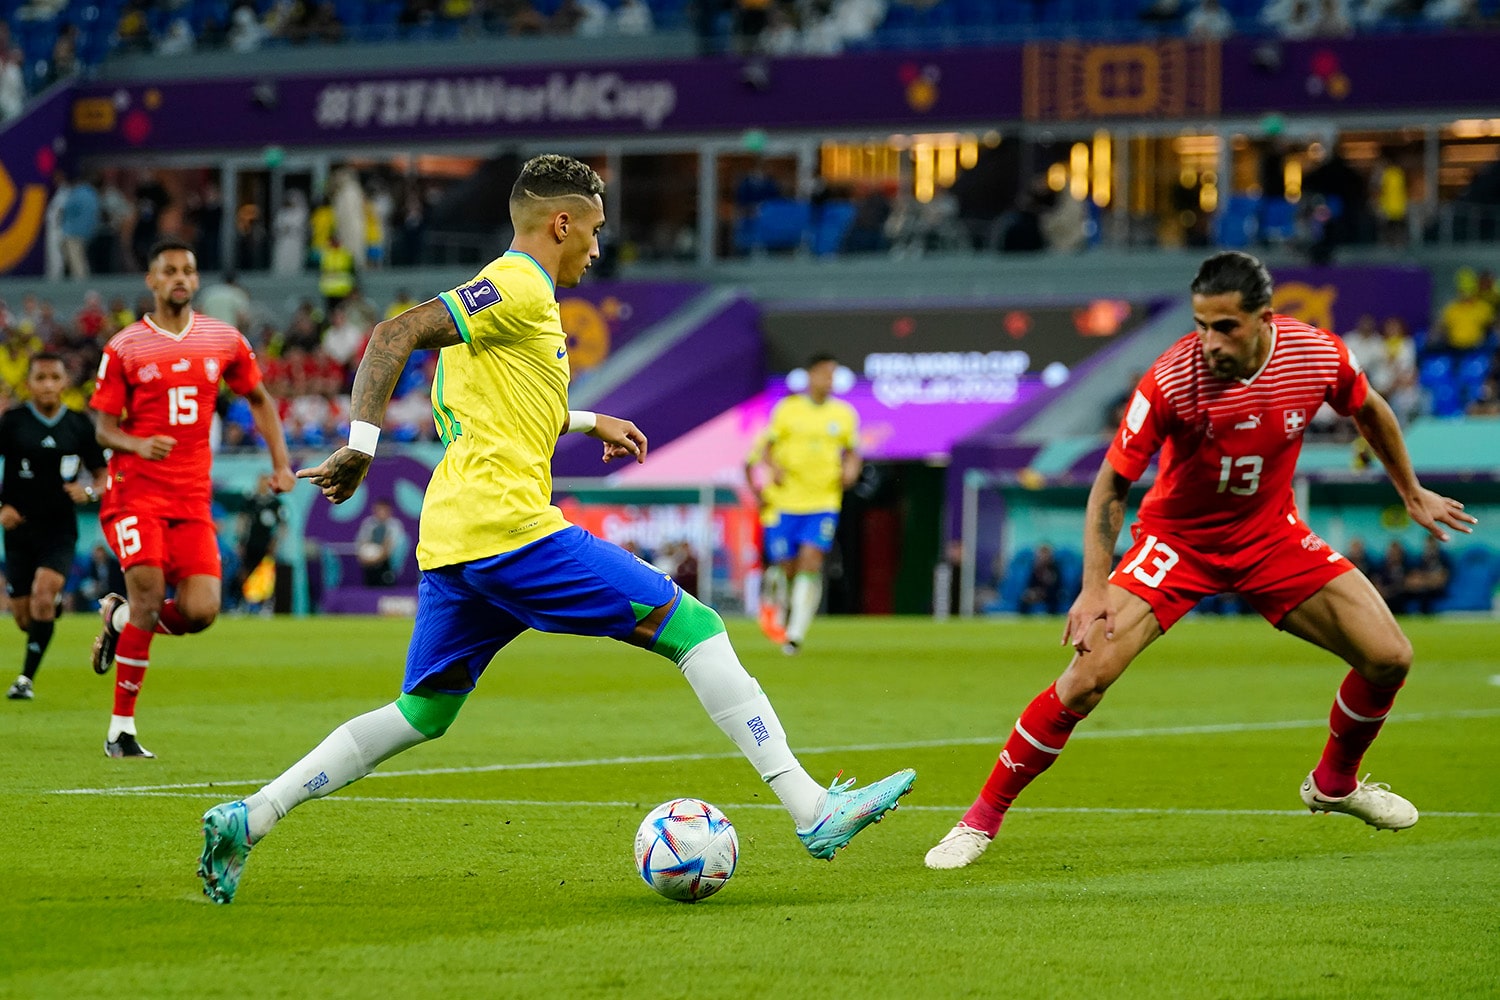 Brazilian attacker Raphinha dribbles at Swiss defender during World Cup match up